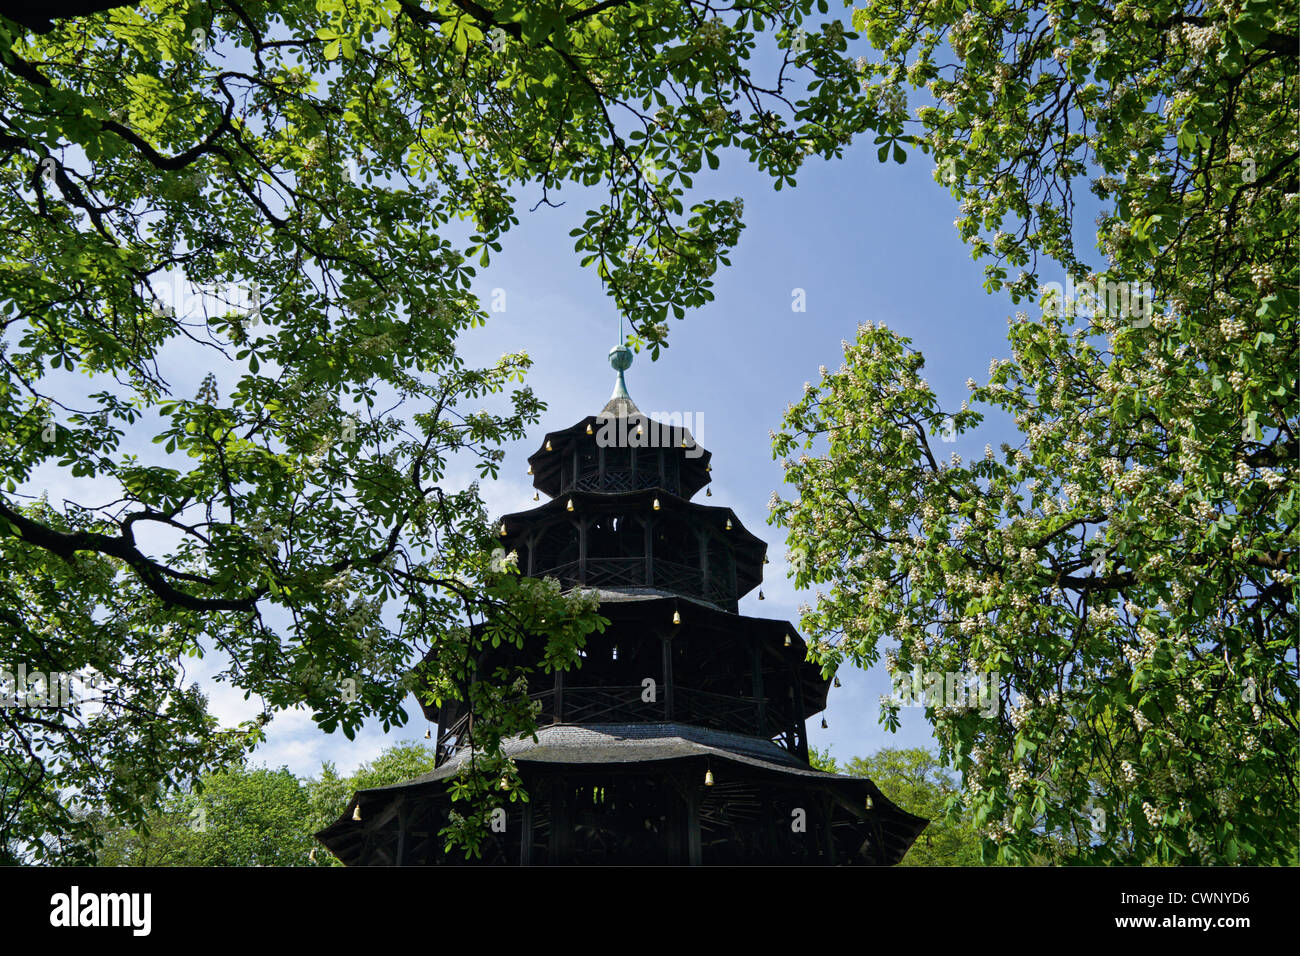 Germany, Bavaria, Munich, Horse chestnut tree with chinese tower in background Stock Photo